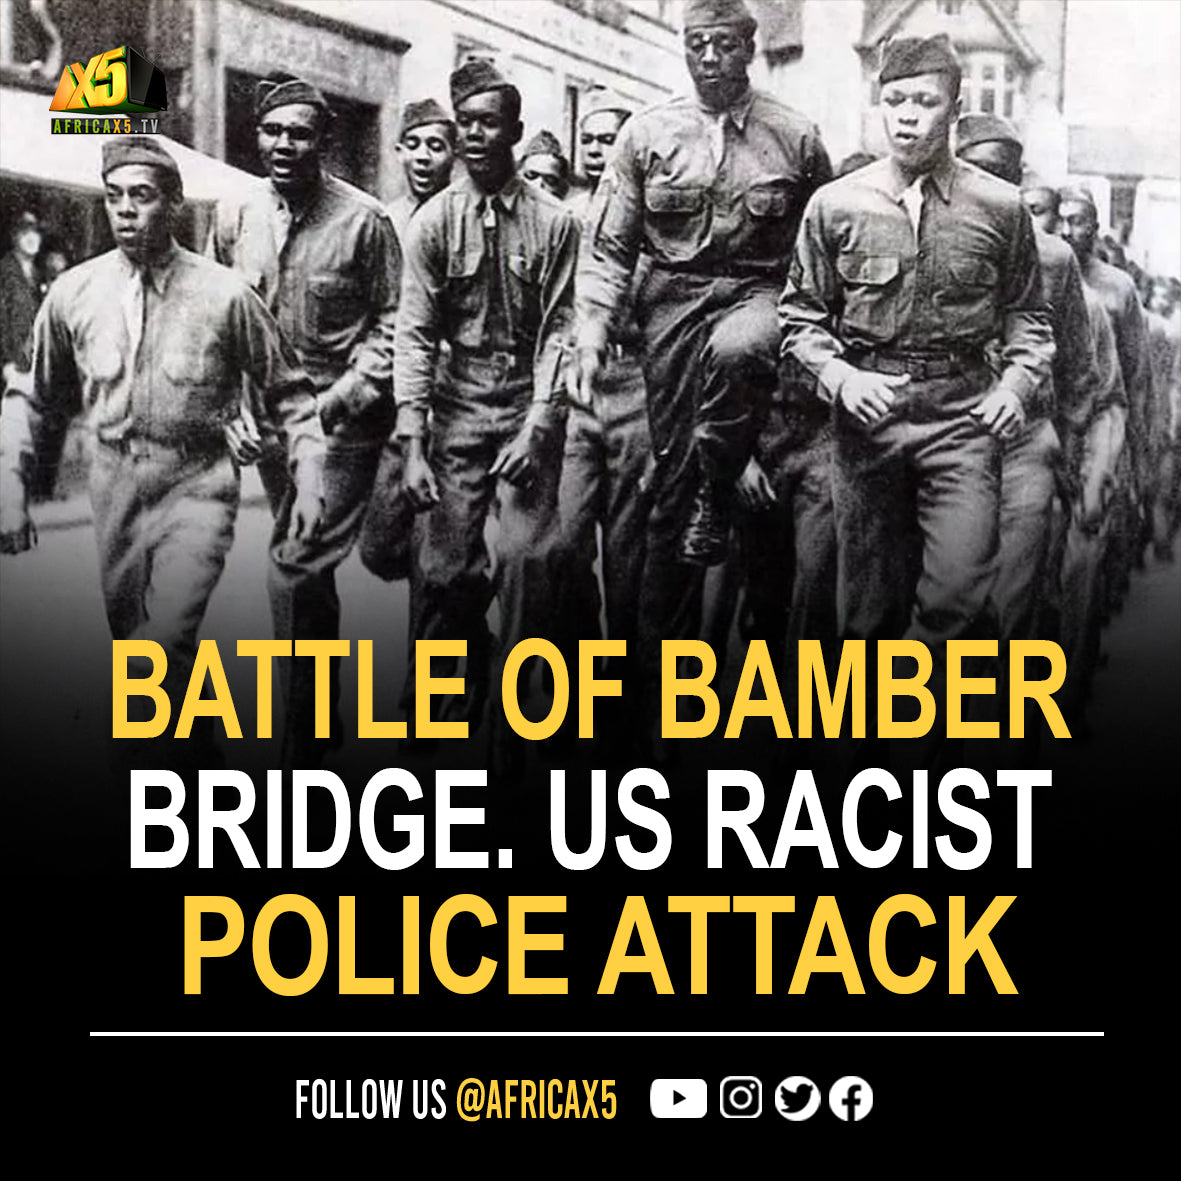 The Battle of Bamber Bridge, 1943.  Racist US military police attacked black US troops on British soil.